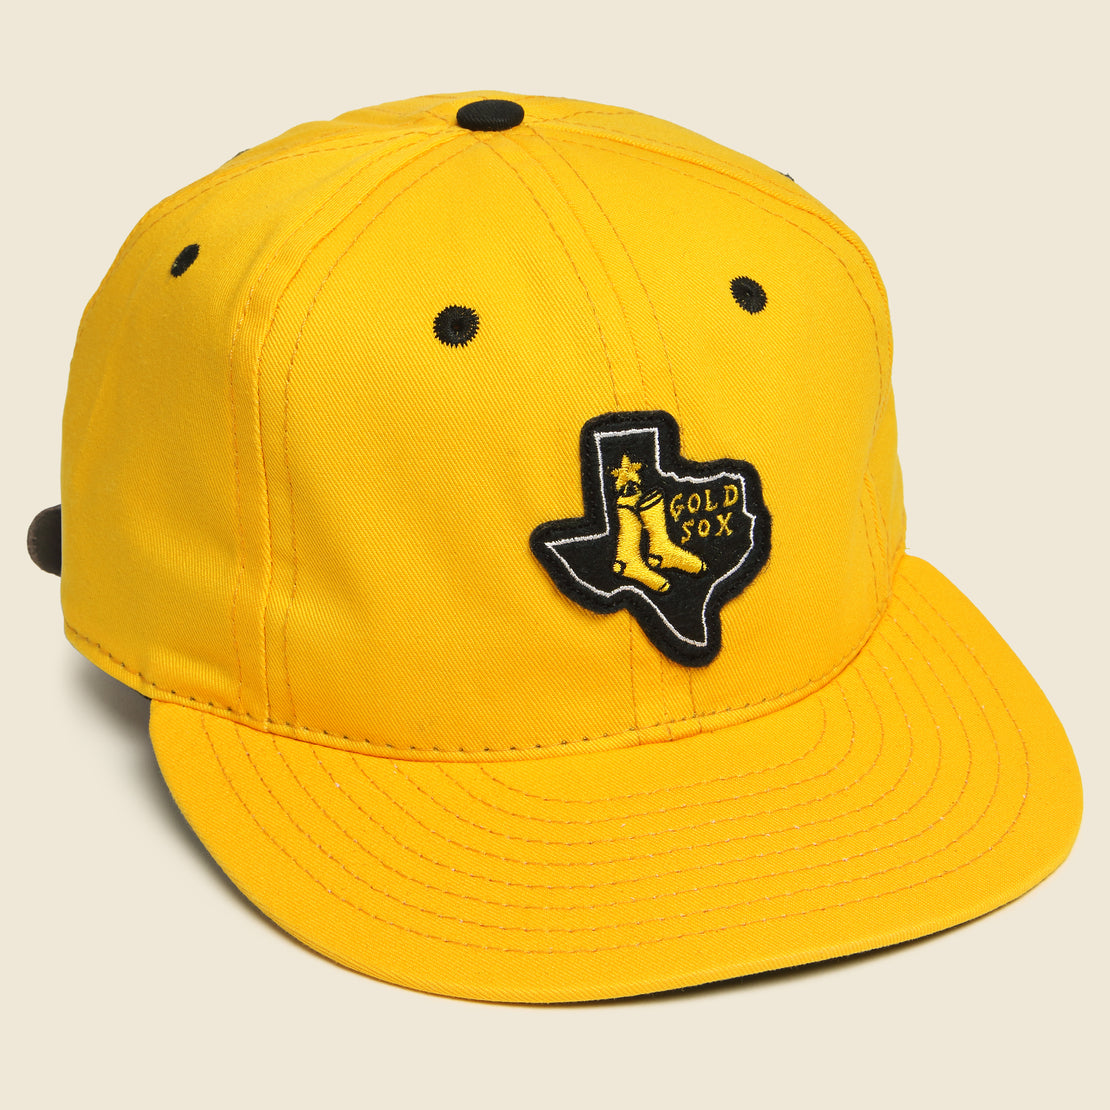 Ebbets Field Flannels Amarillo Gold Sox Cotton Hat - Yellow